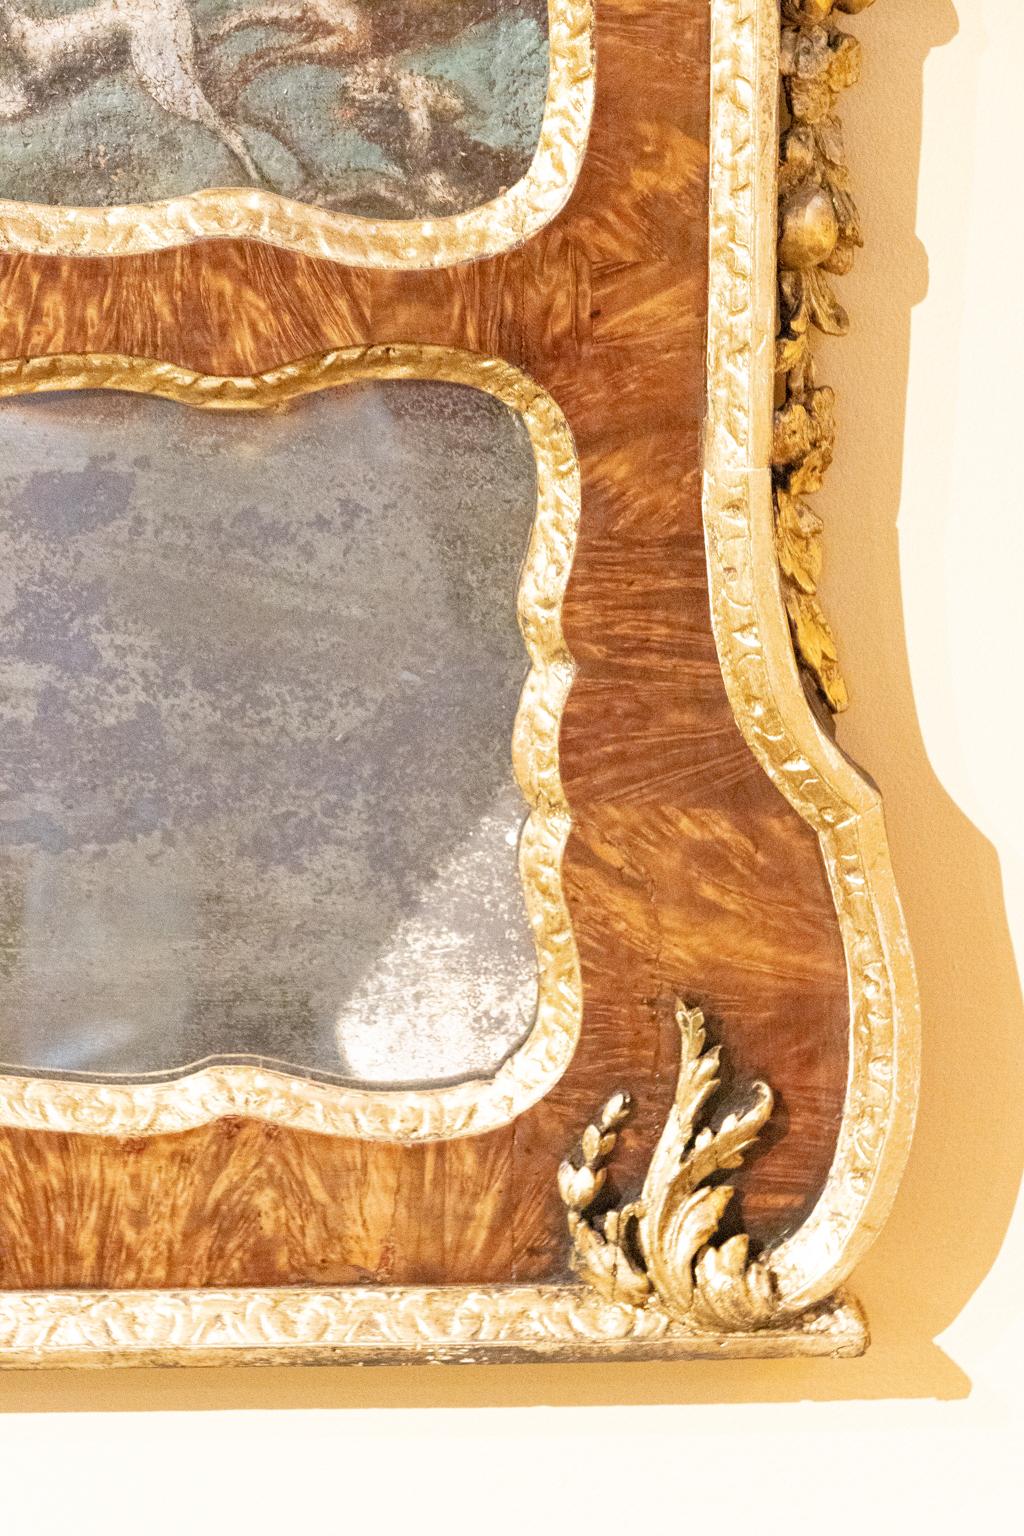 English Georgian 18th century mirror with oil on canvas hunt scene, circa 1780s. The mirror features Amboyna wood with gilt carved trim, new antiqued mirror, and re-gilded gilt trim. Made in England. Please note of wear consistent with age including